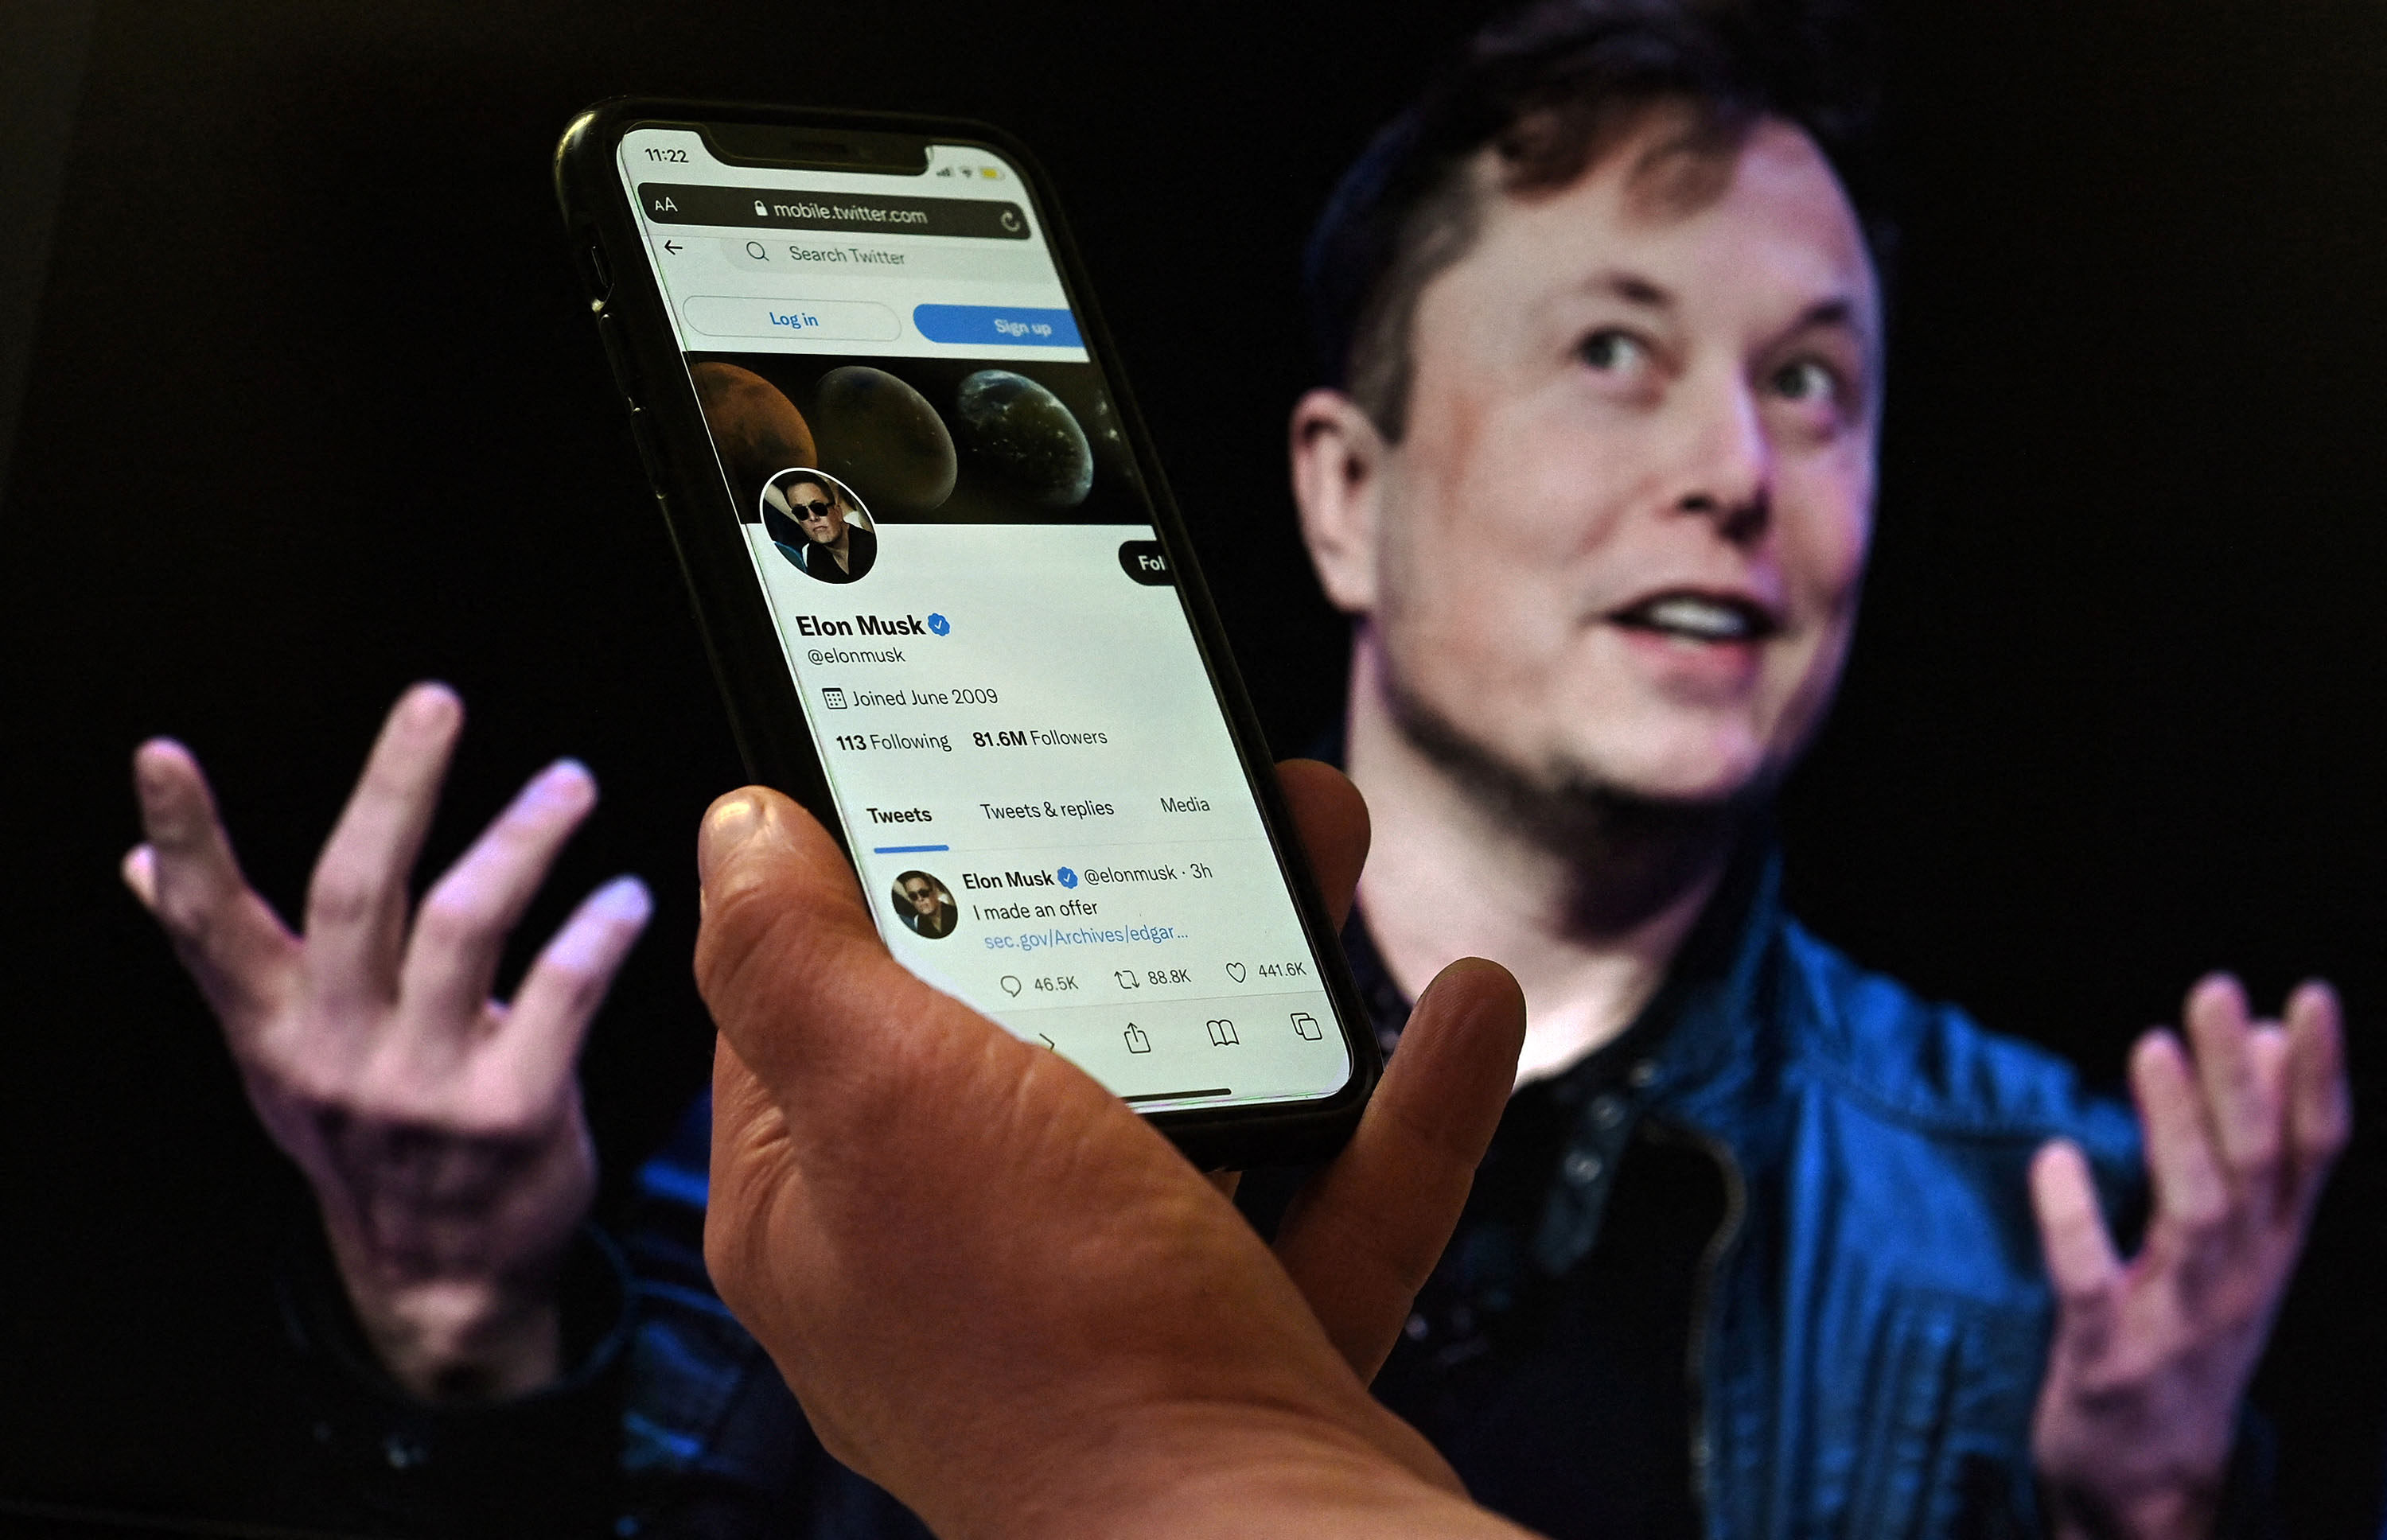 A phone displays the Twitter account of Elon Musk with an image of him displayed in the background in this photo taken on December 15, 2022. Photo: AFP